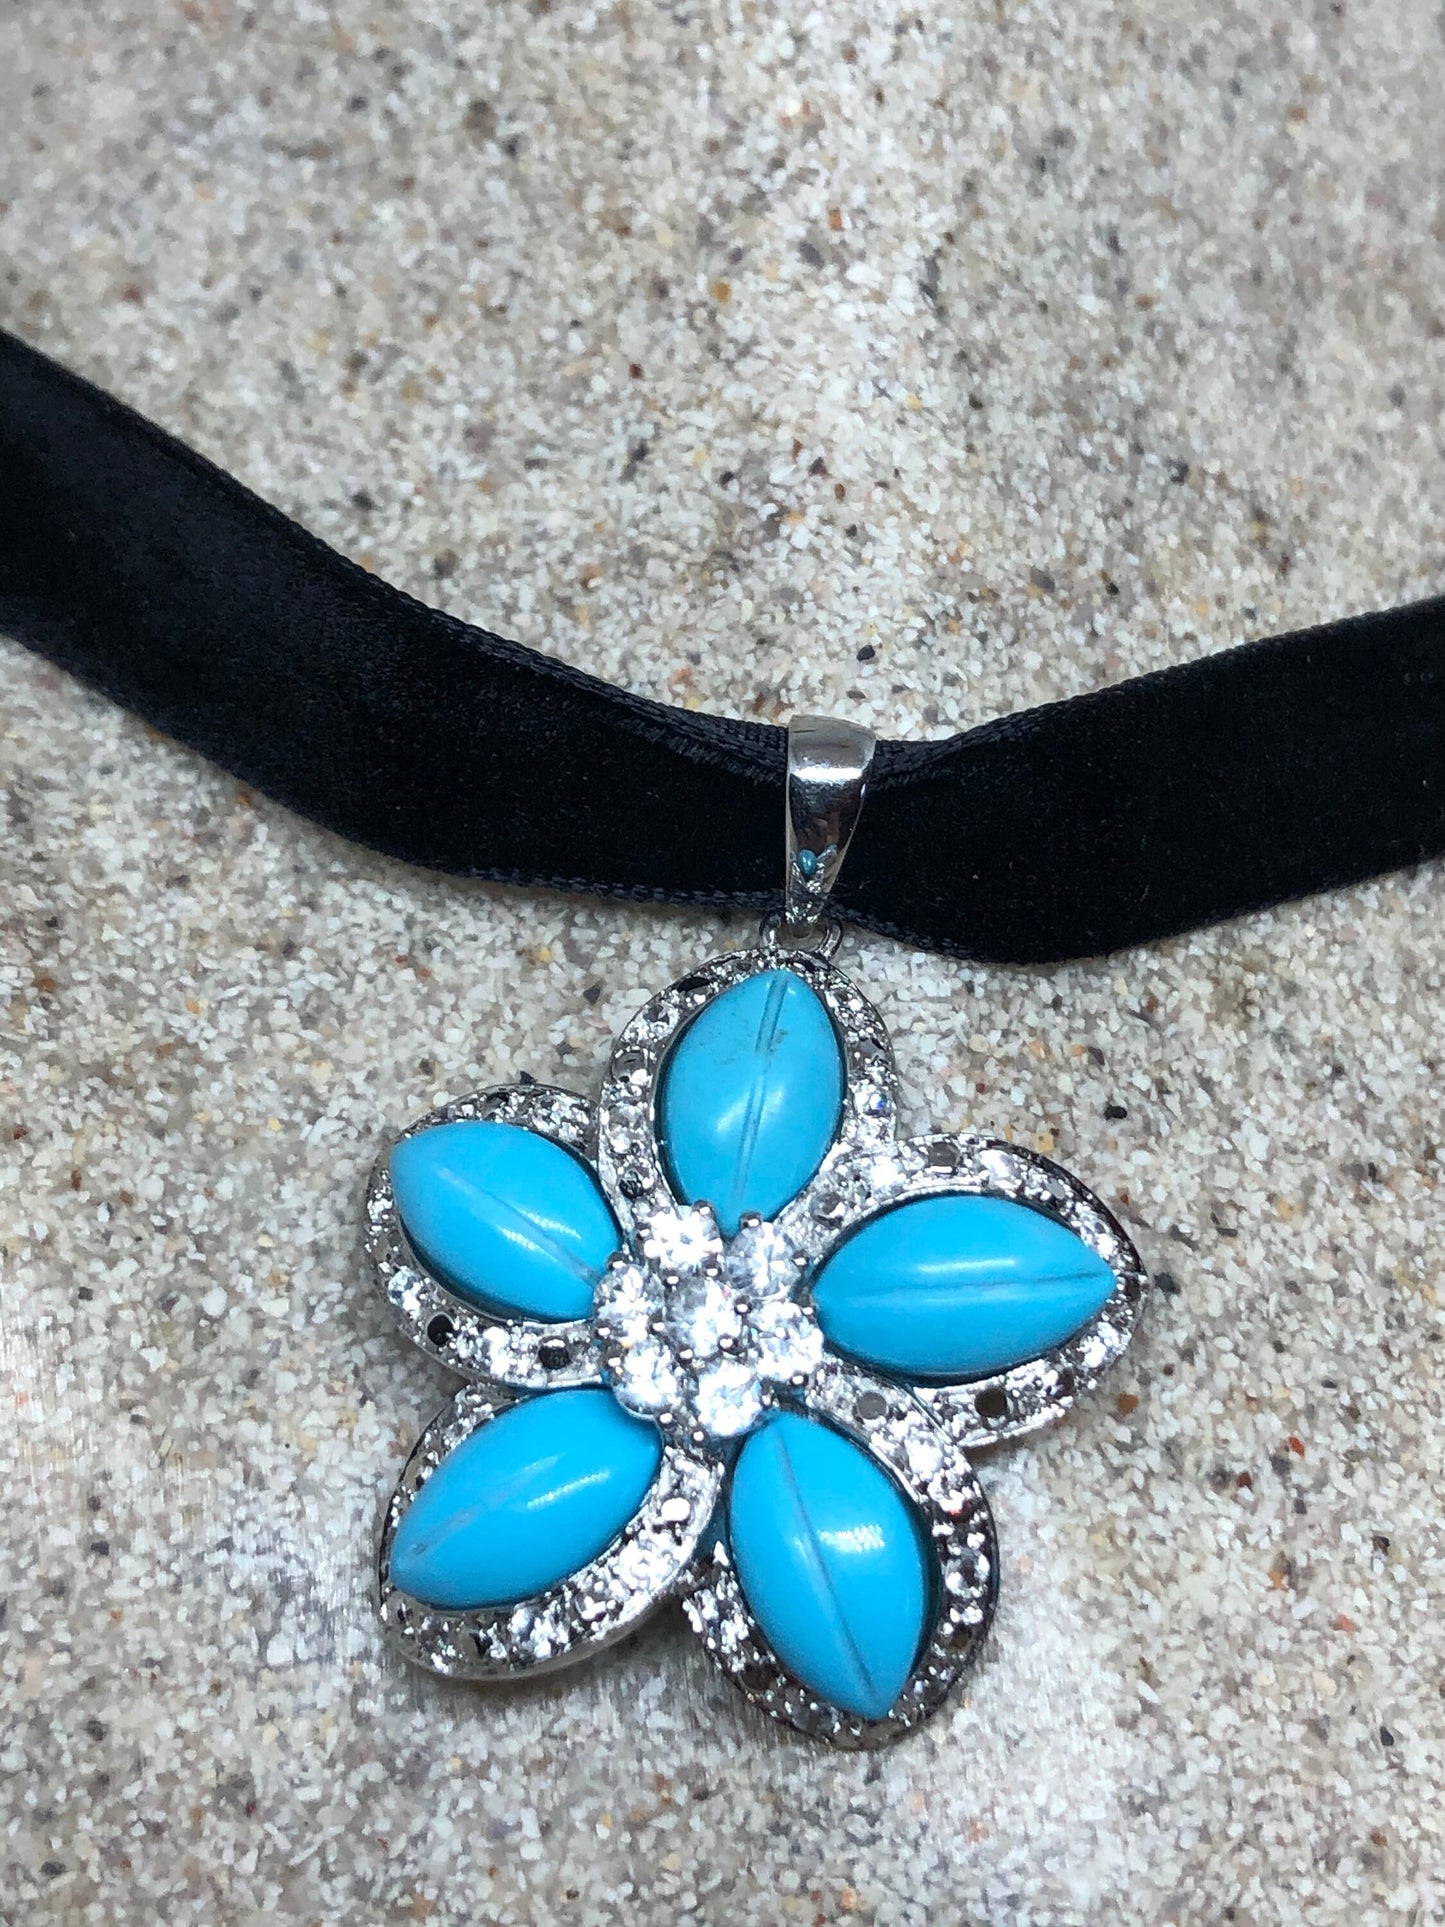 Vintage 925 Sterling Silver Persian Blue Turquoise Flower Pendant Necklace